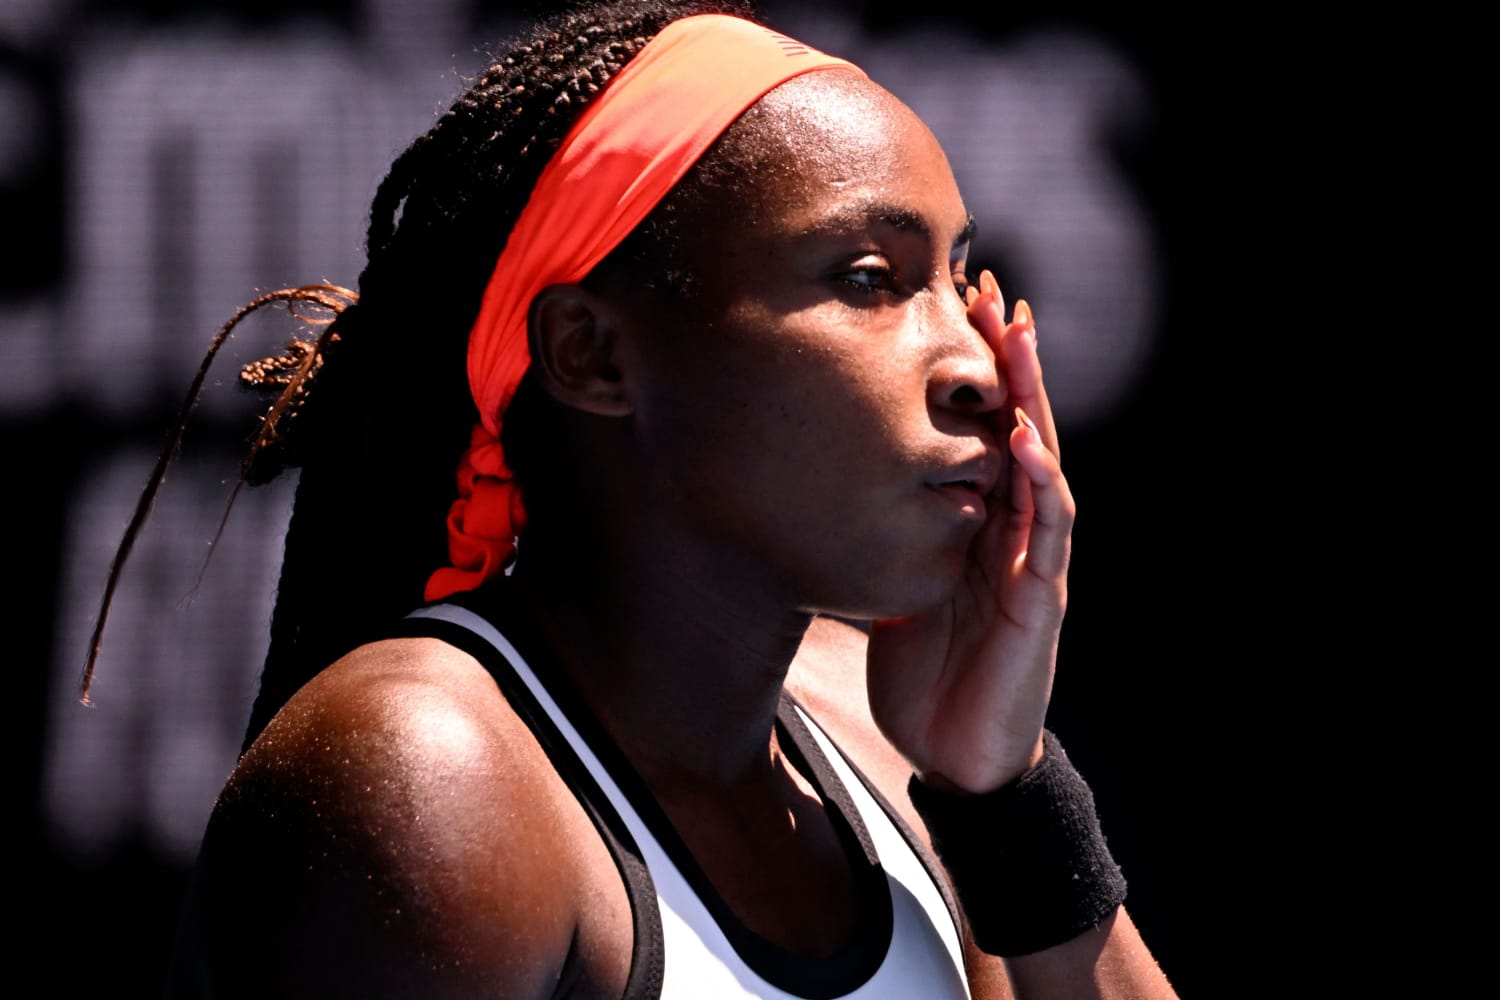 Coco Gauff in tears after defeat at Australian Open